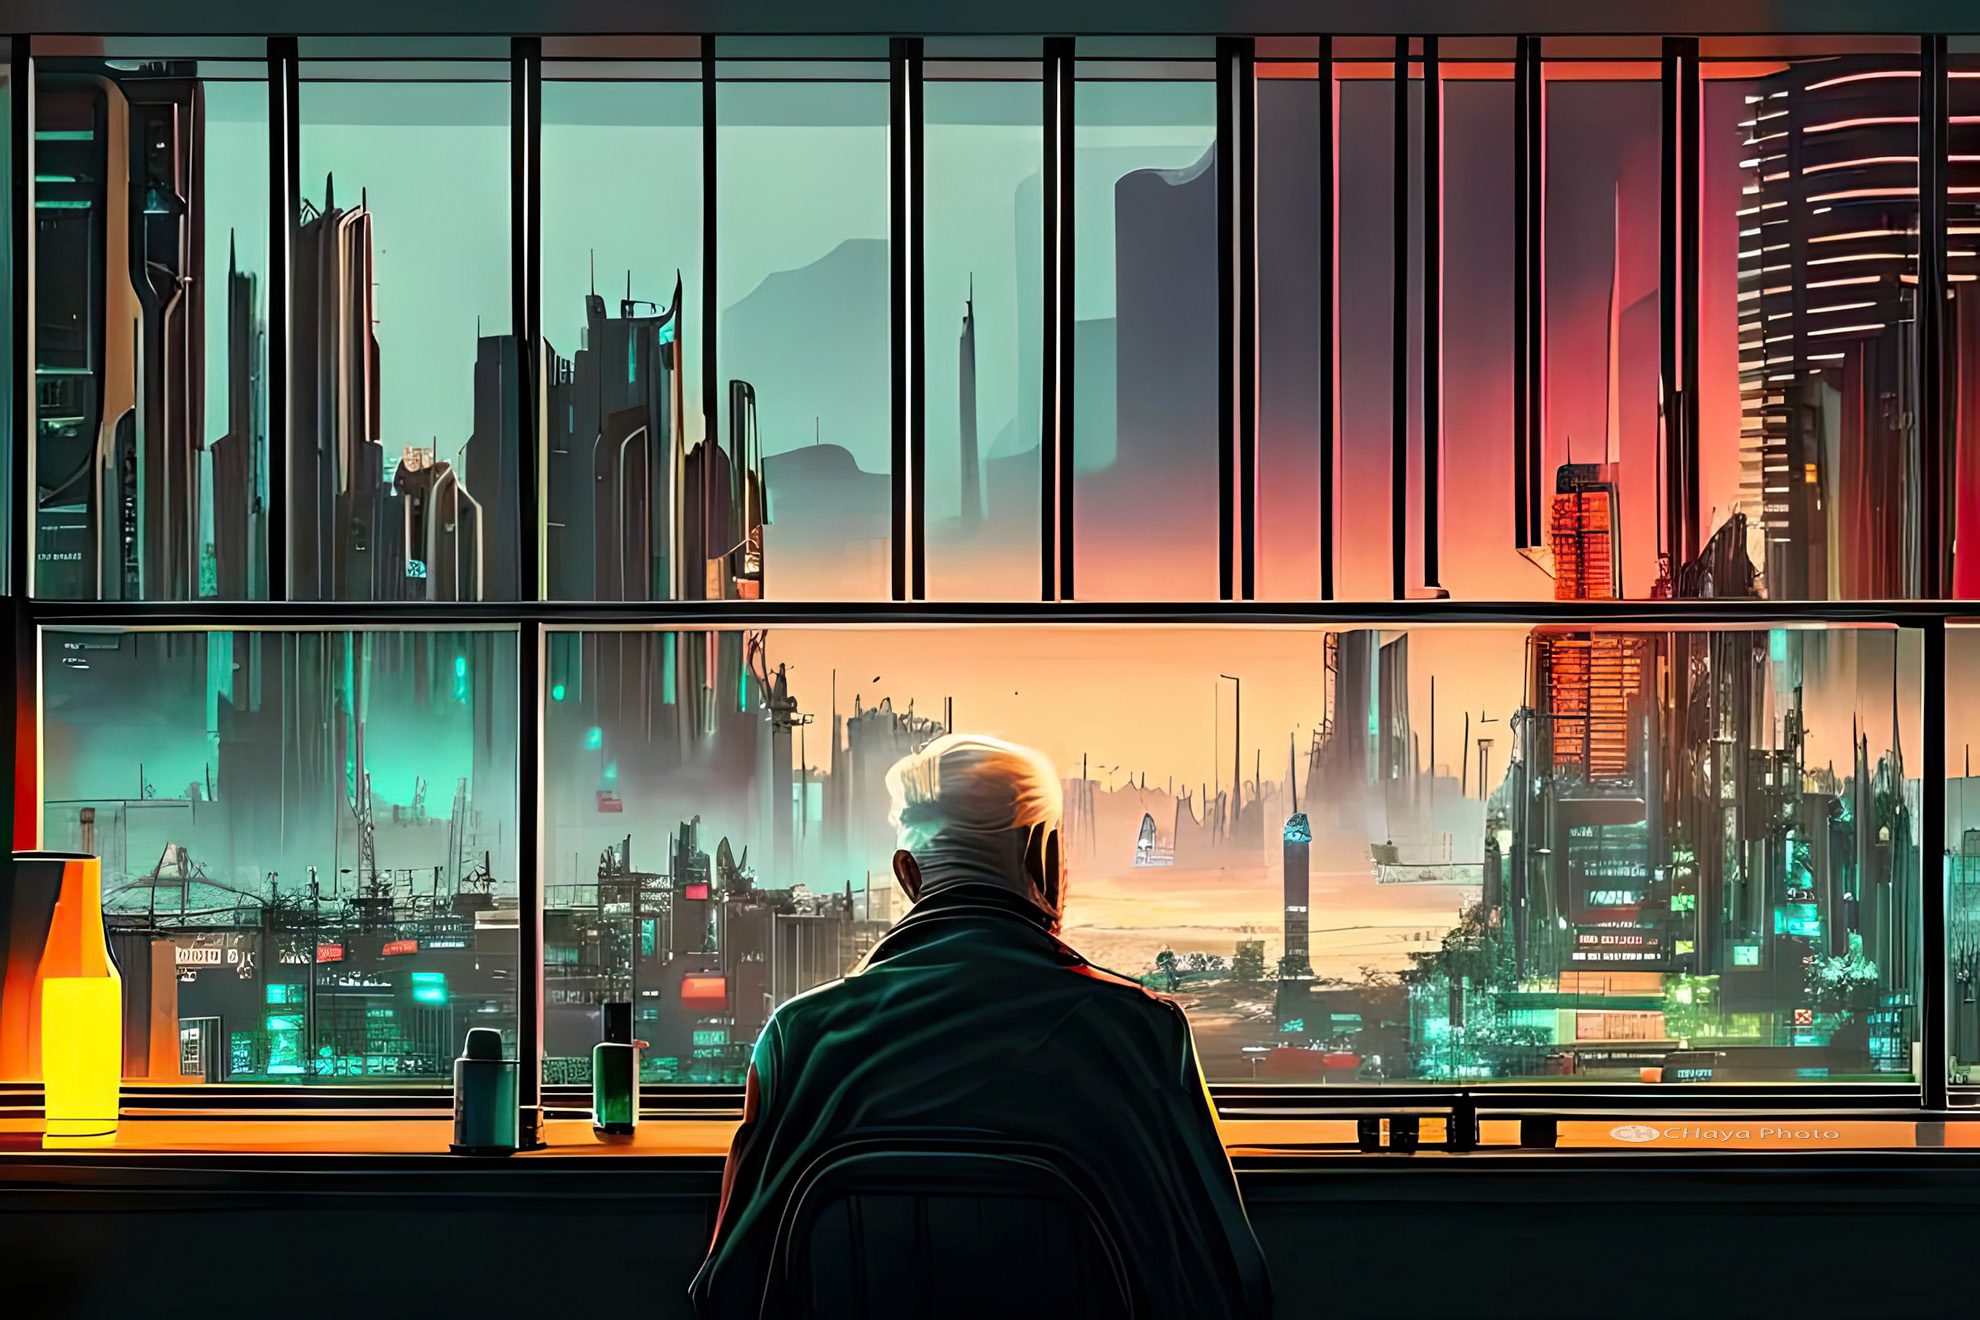 An old man looks at a futuristic dystopian city